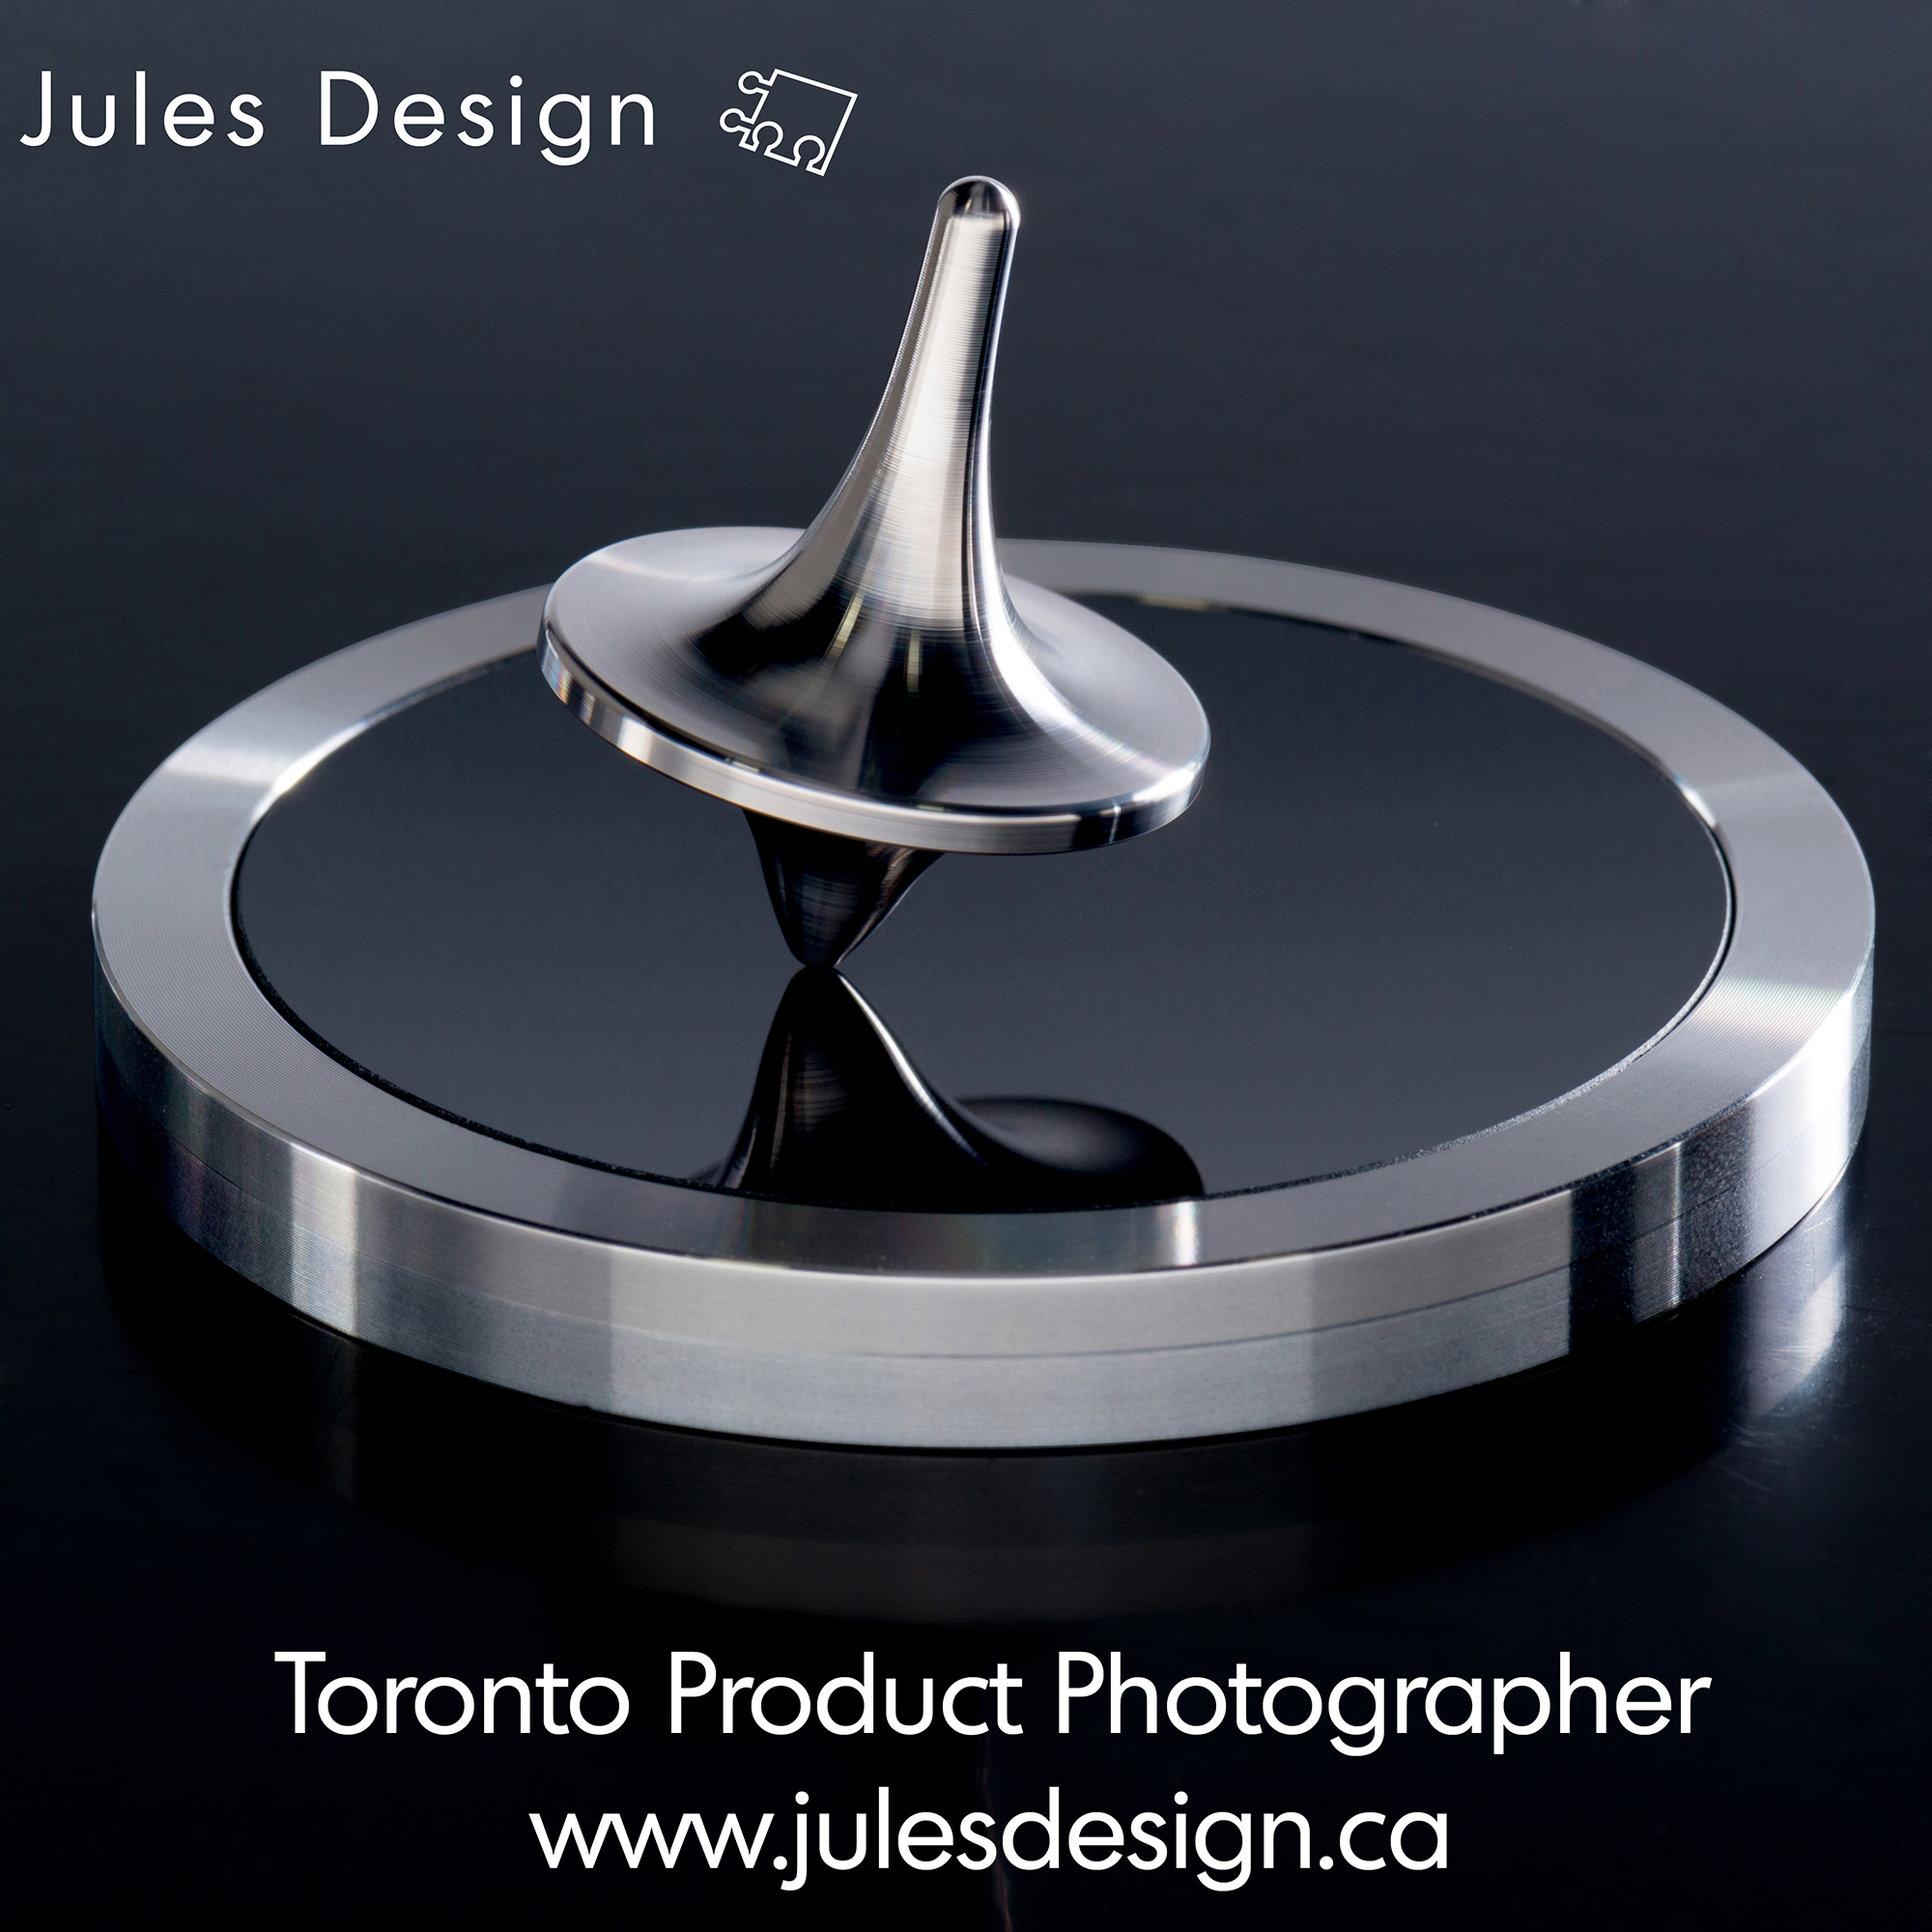 Advanced Photo Merchandising - Product Photography for Premium Products